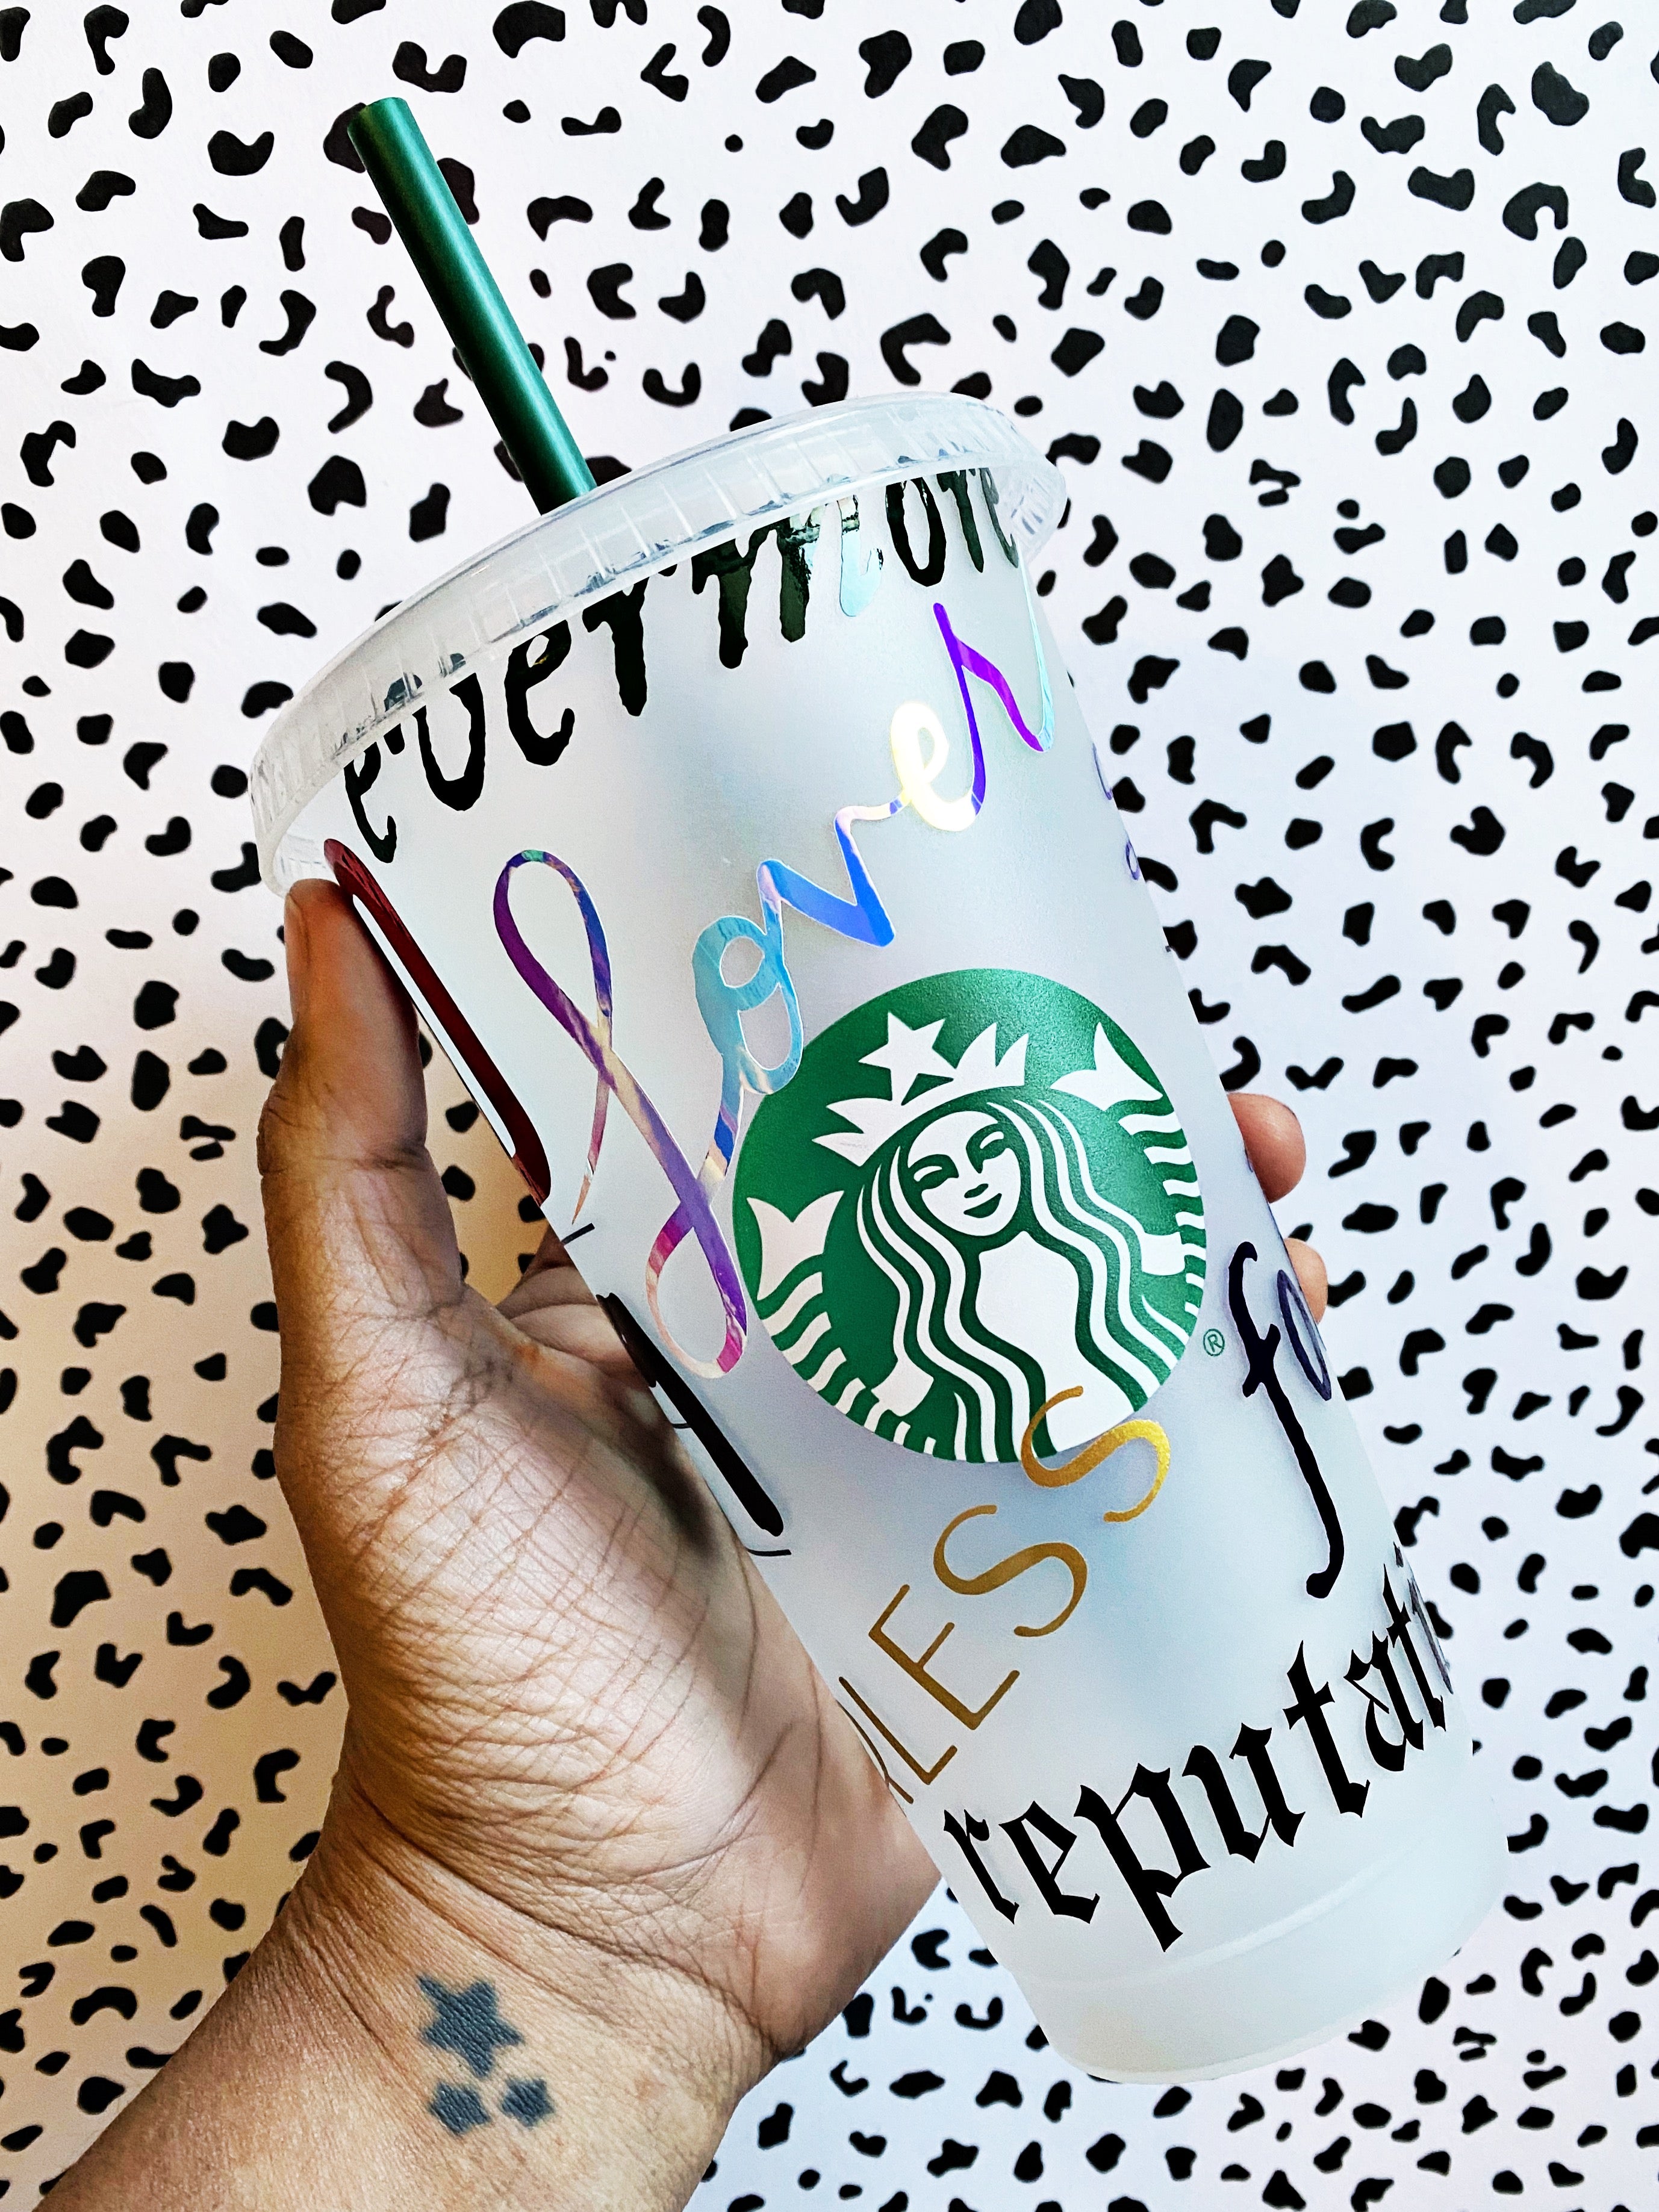 lv starbucks cup with name